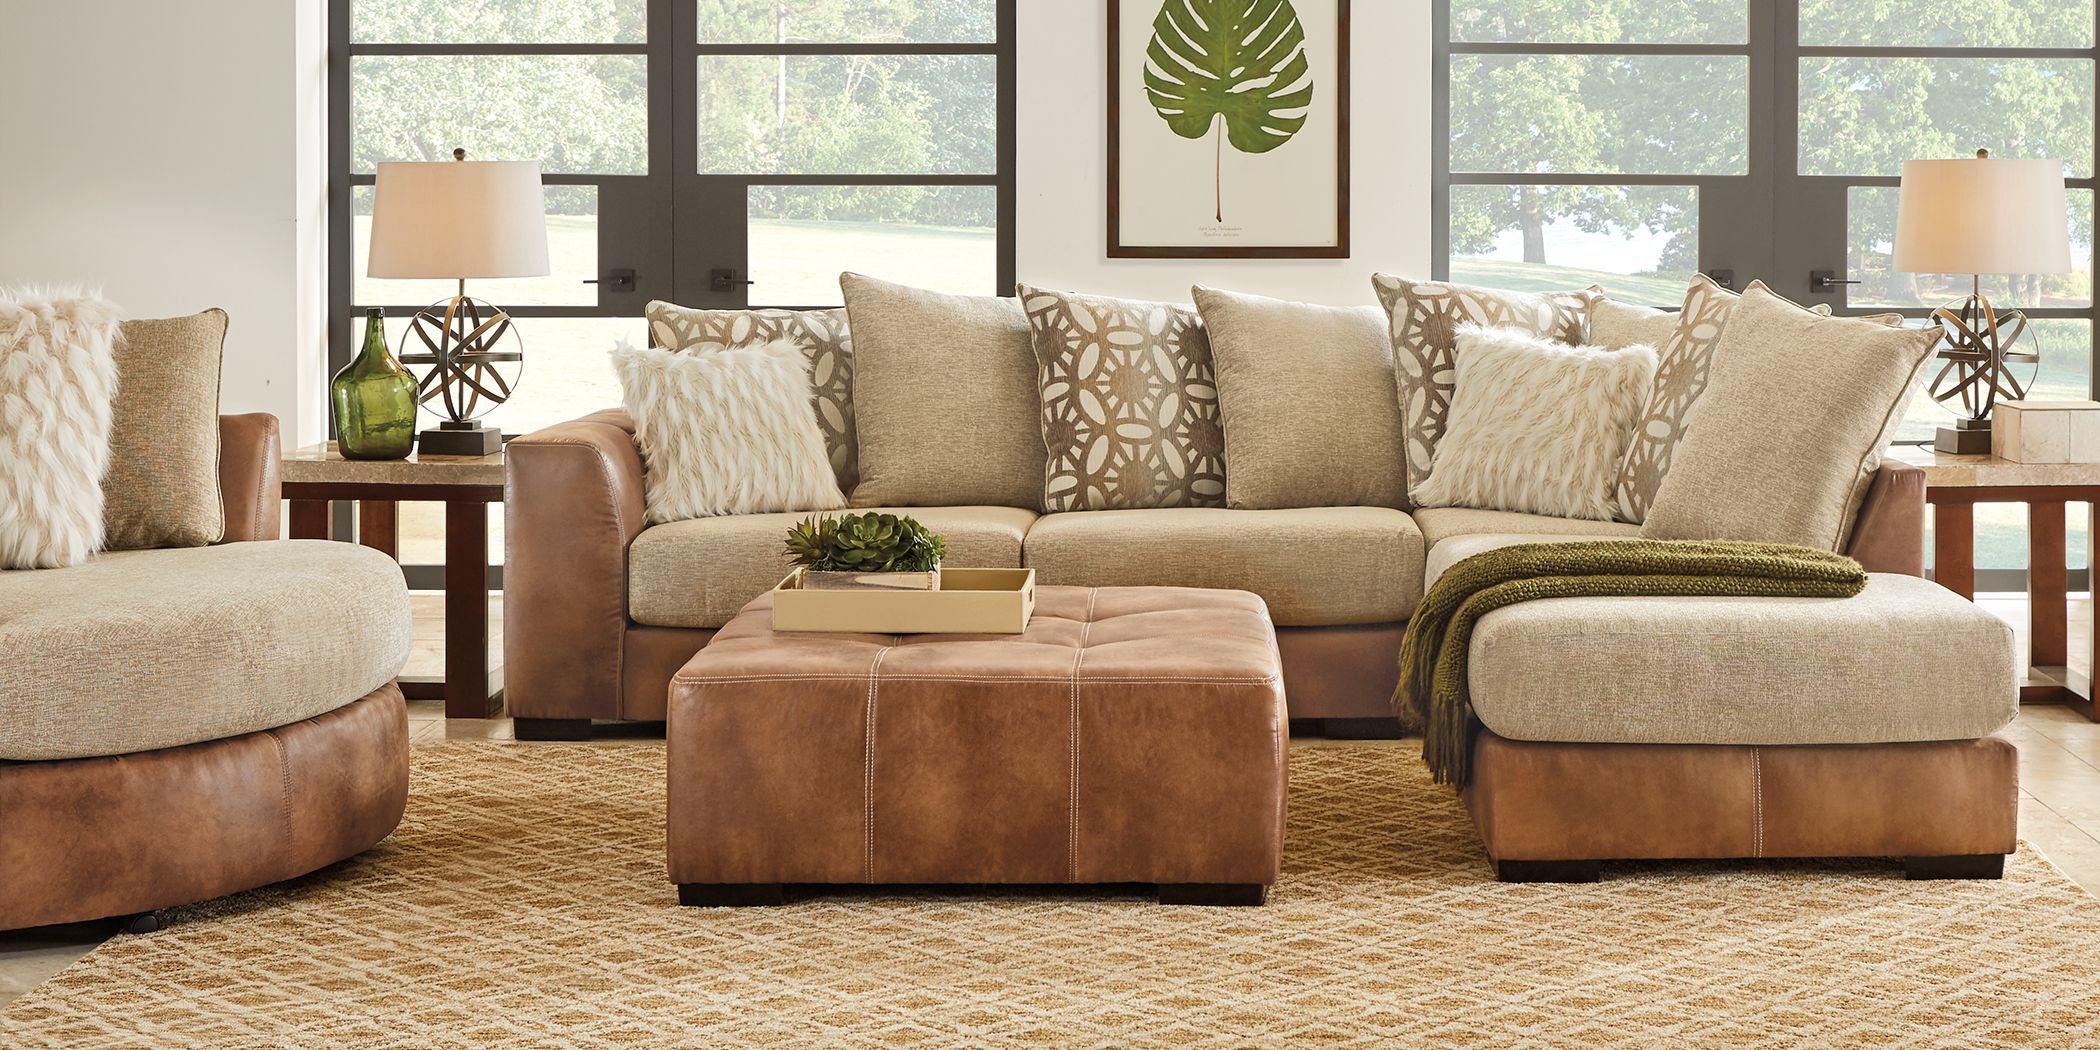 Ballinger Beige 3 Pc Sectional Living, Beige Couch Living Room